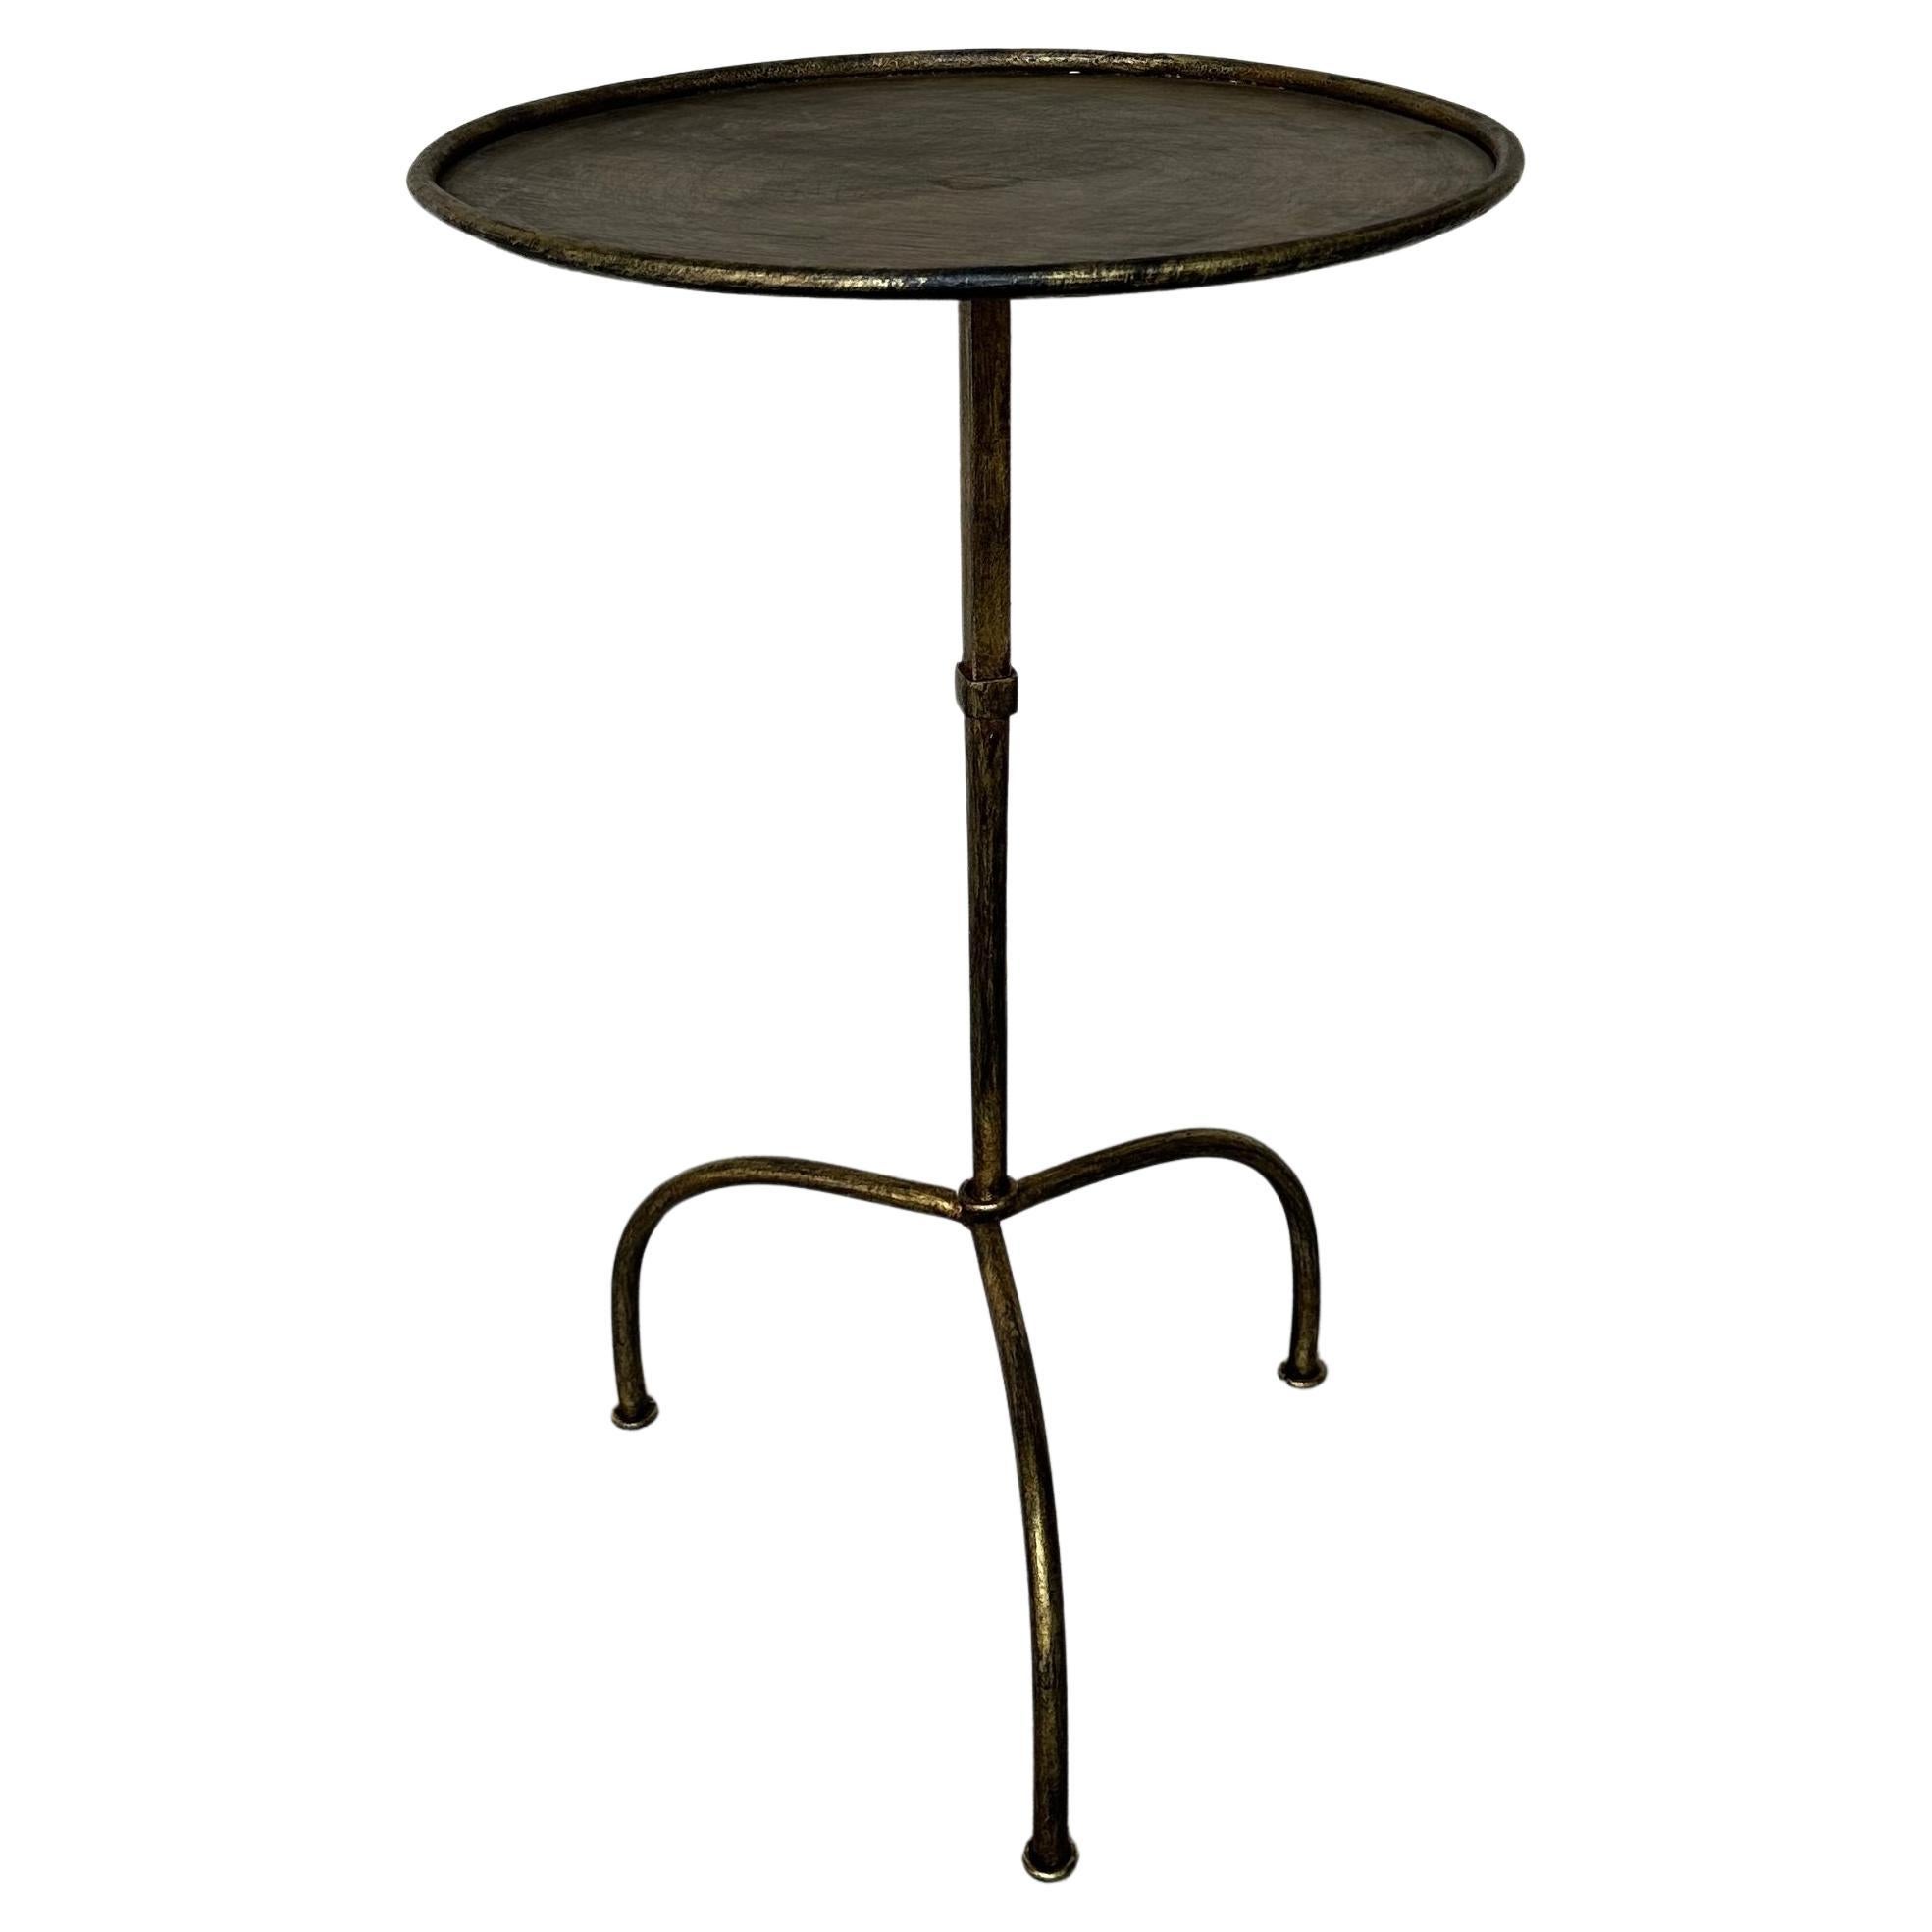 Spanish Iron Drinks Table on an Arched Tripod Base